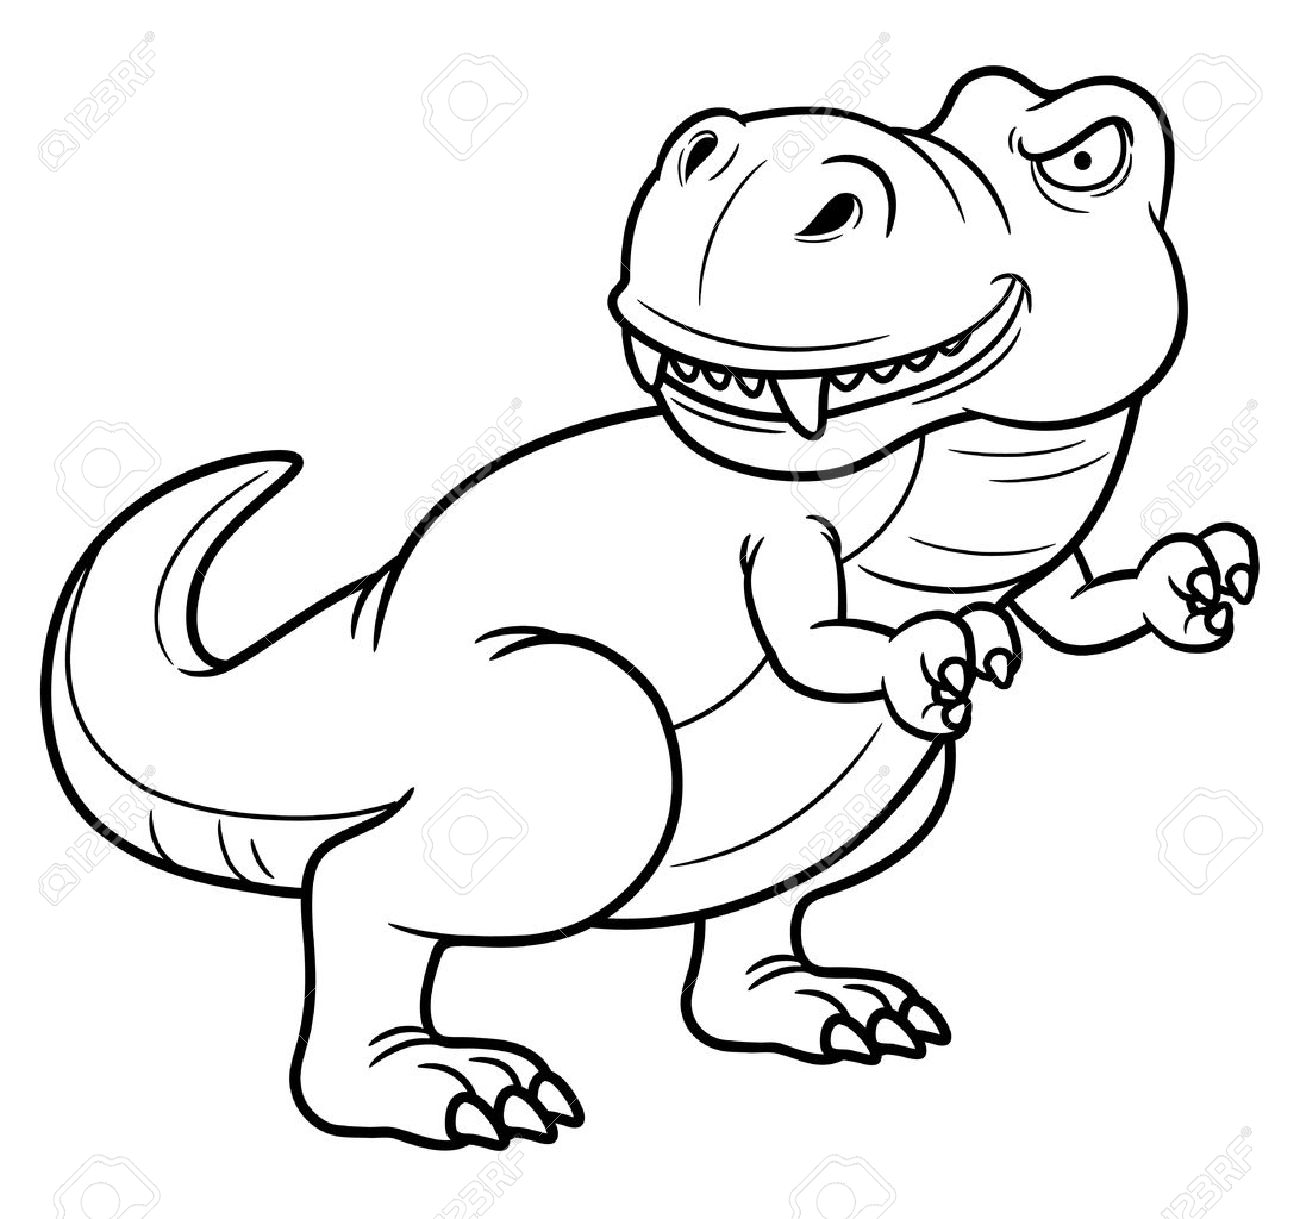 T-Rex With Big Nose Coloring Page